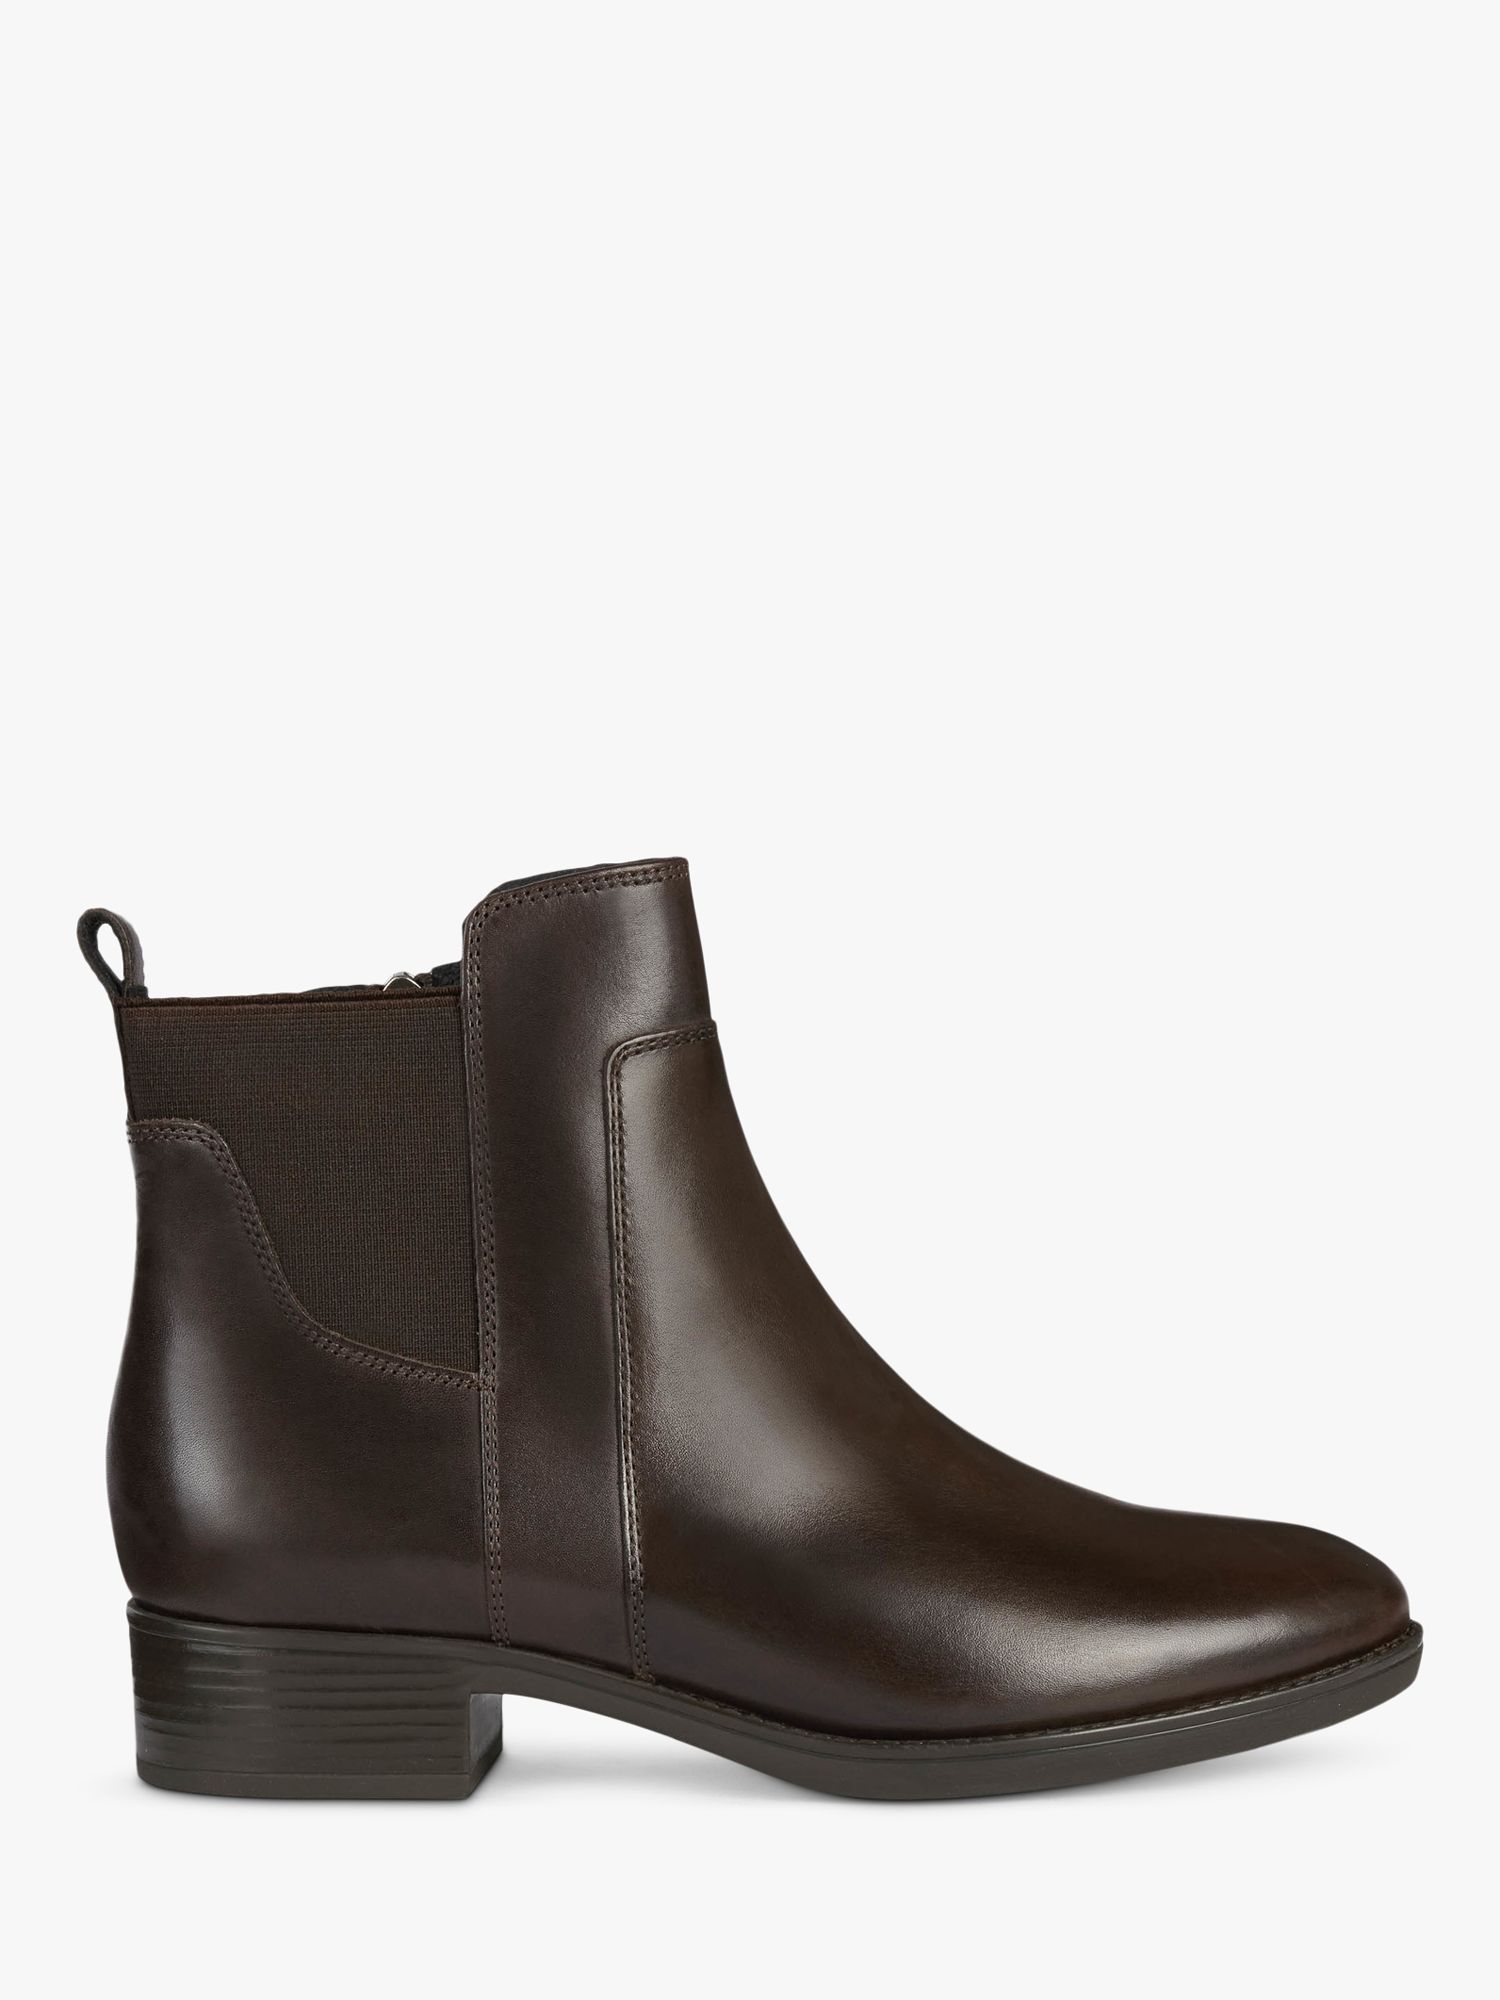 Geox Women's Felicity Leather Heeled Ankle Boots, Coffee at John Lewis ...